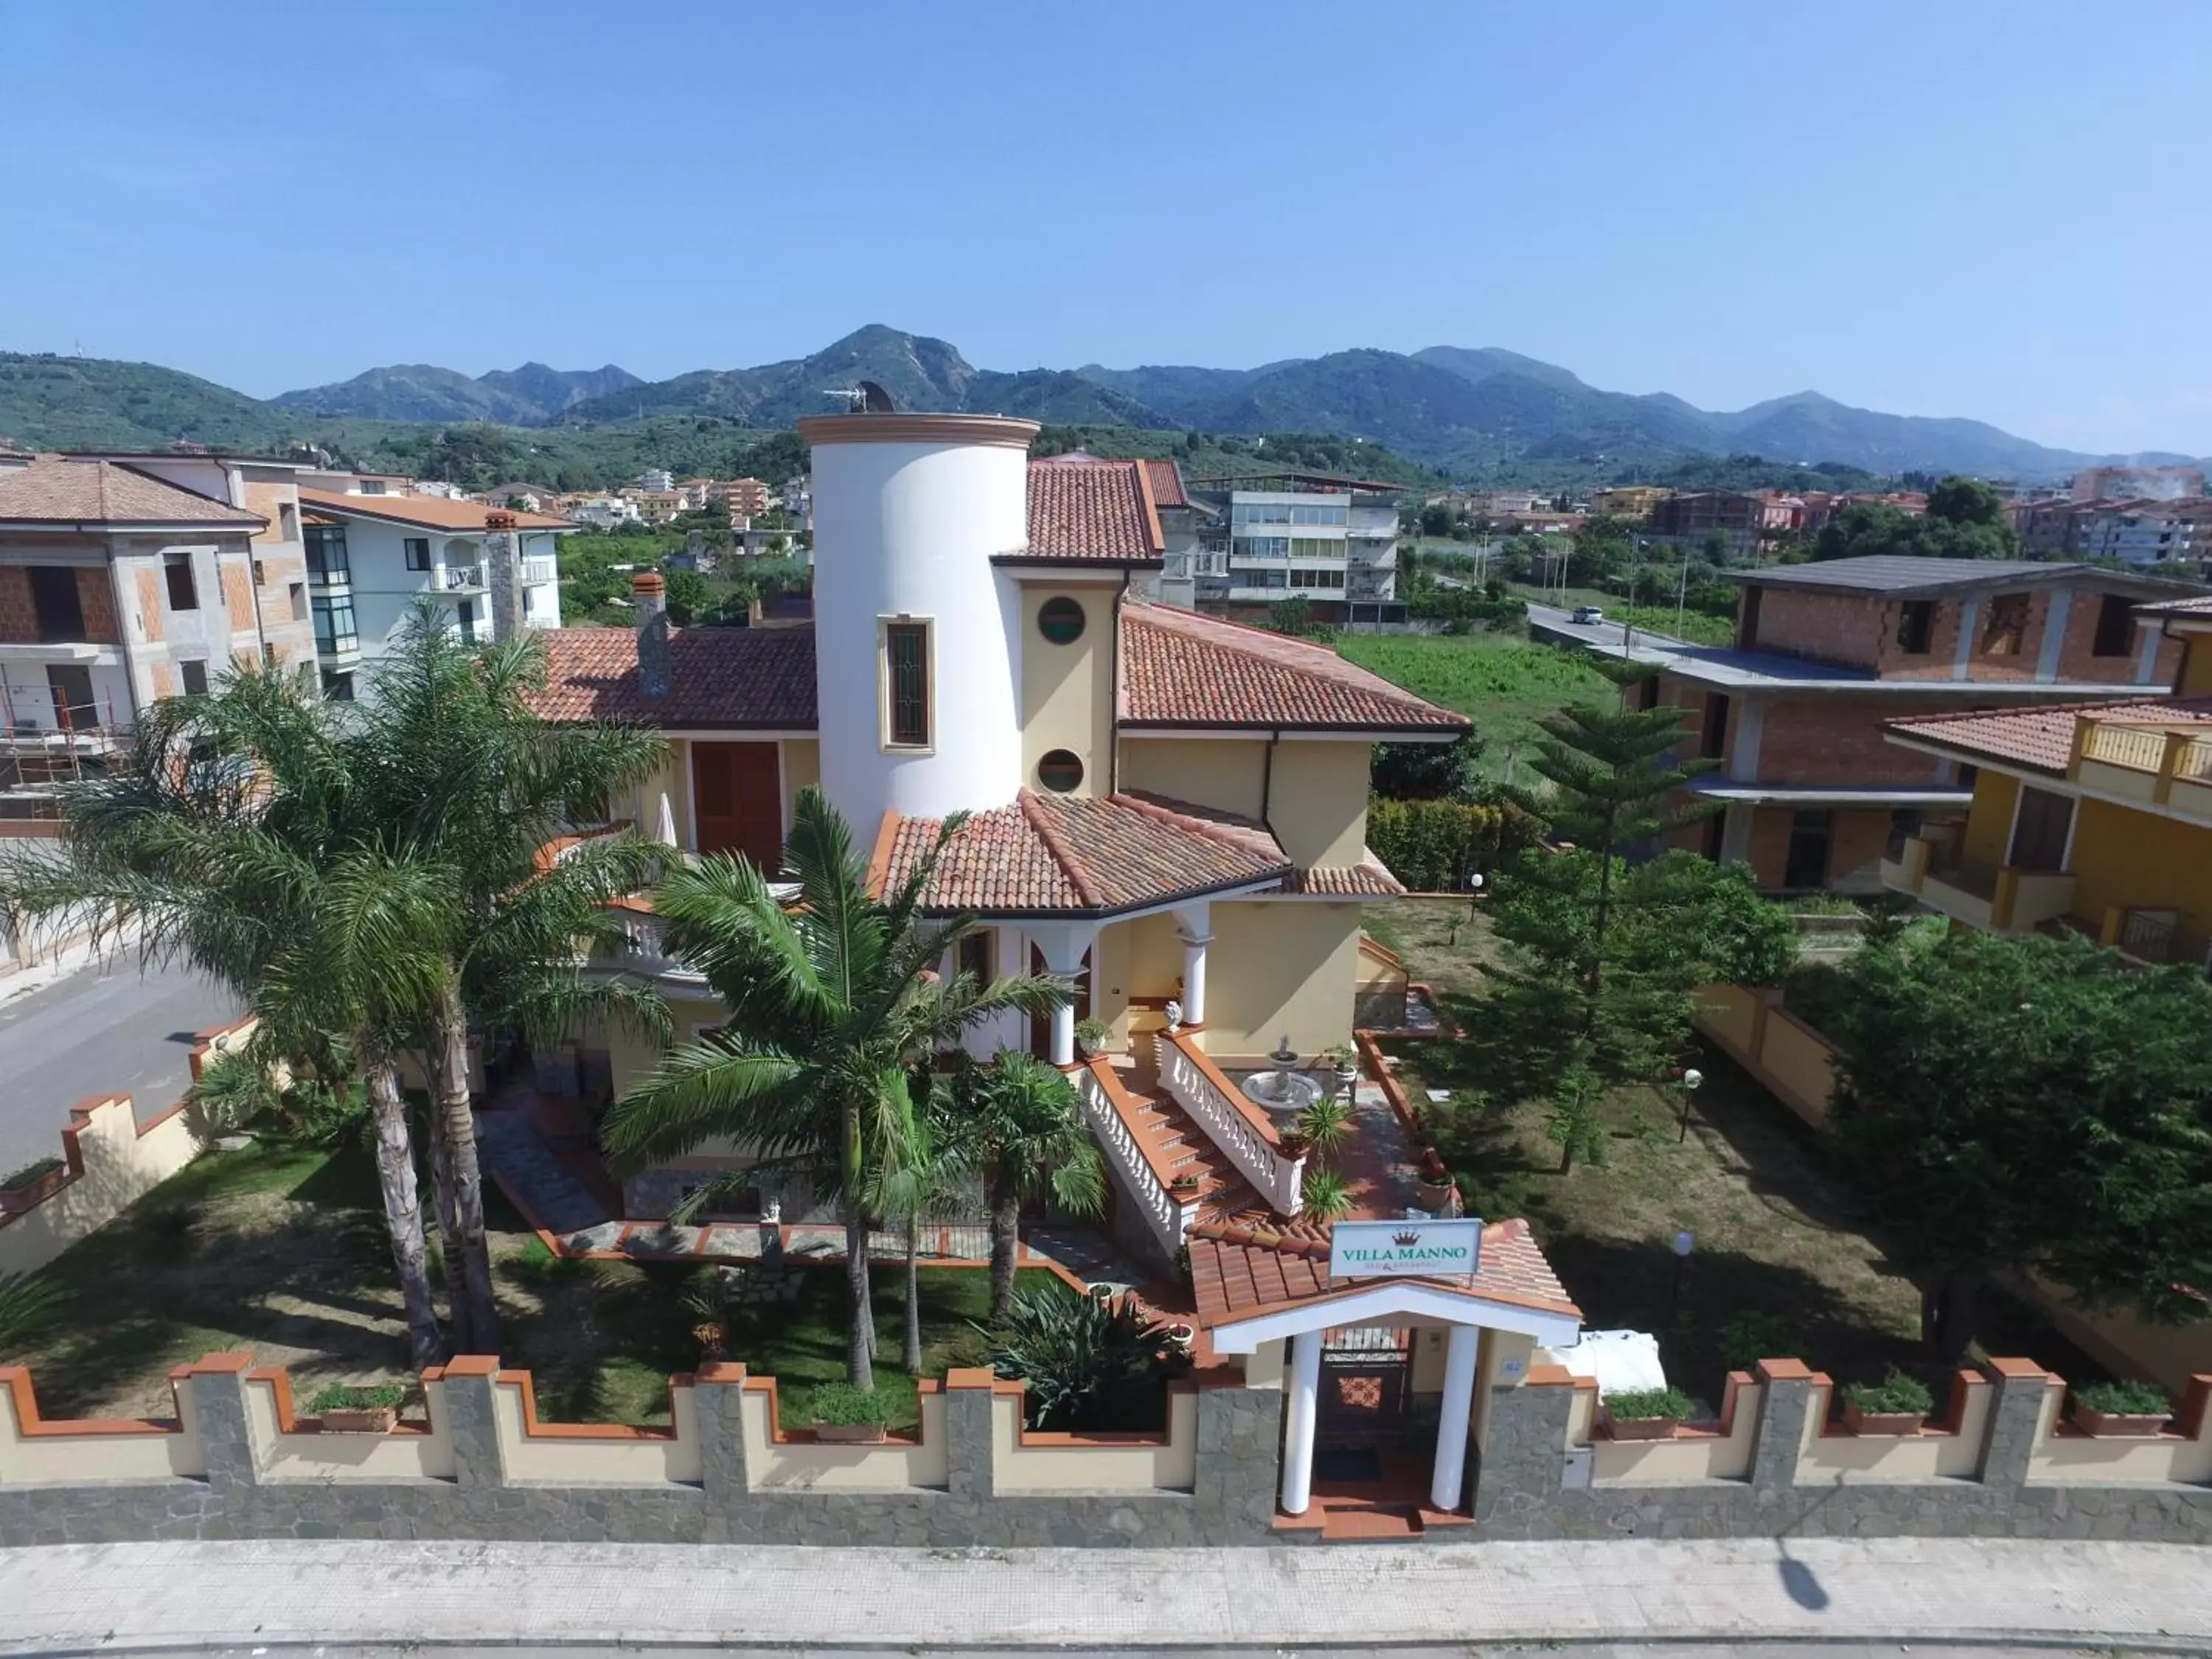 Mountain view, Property Building in Villa Manno